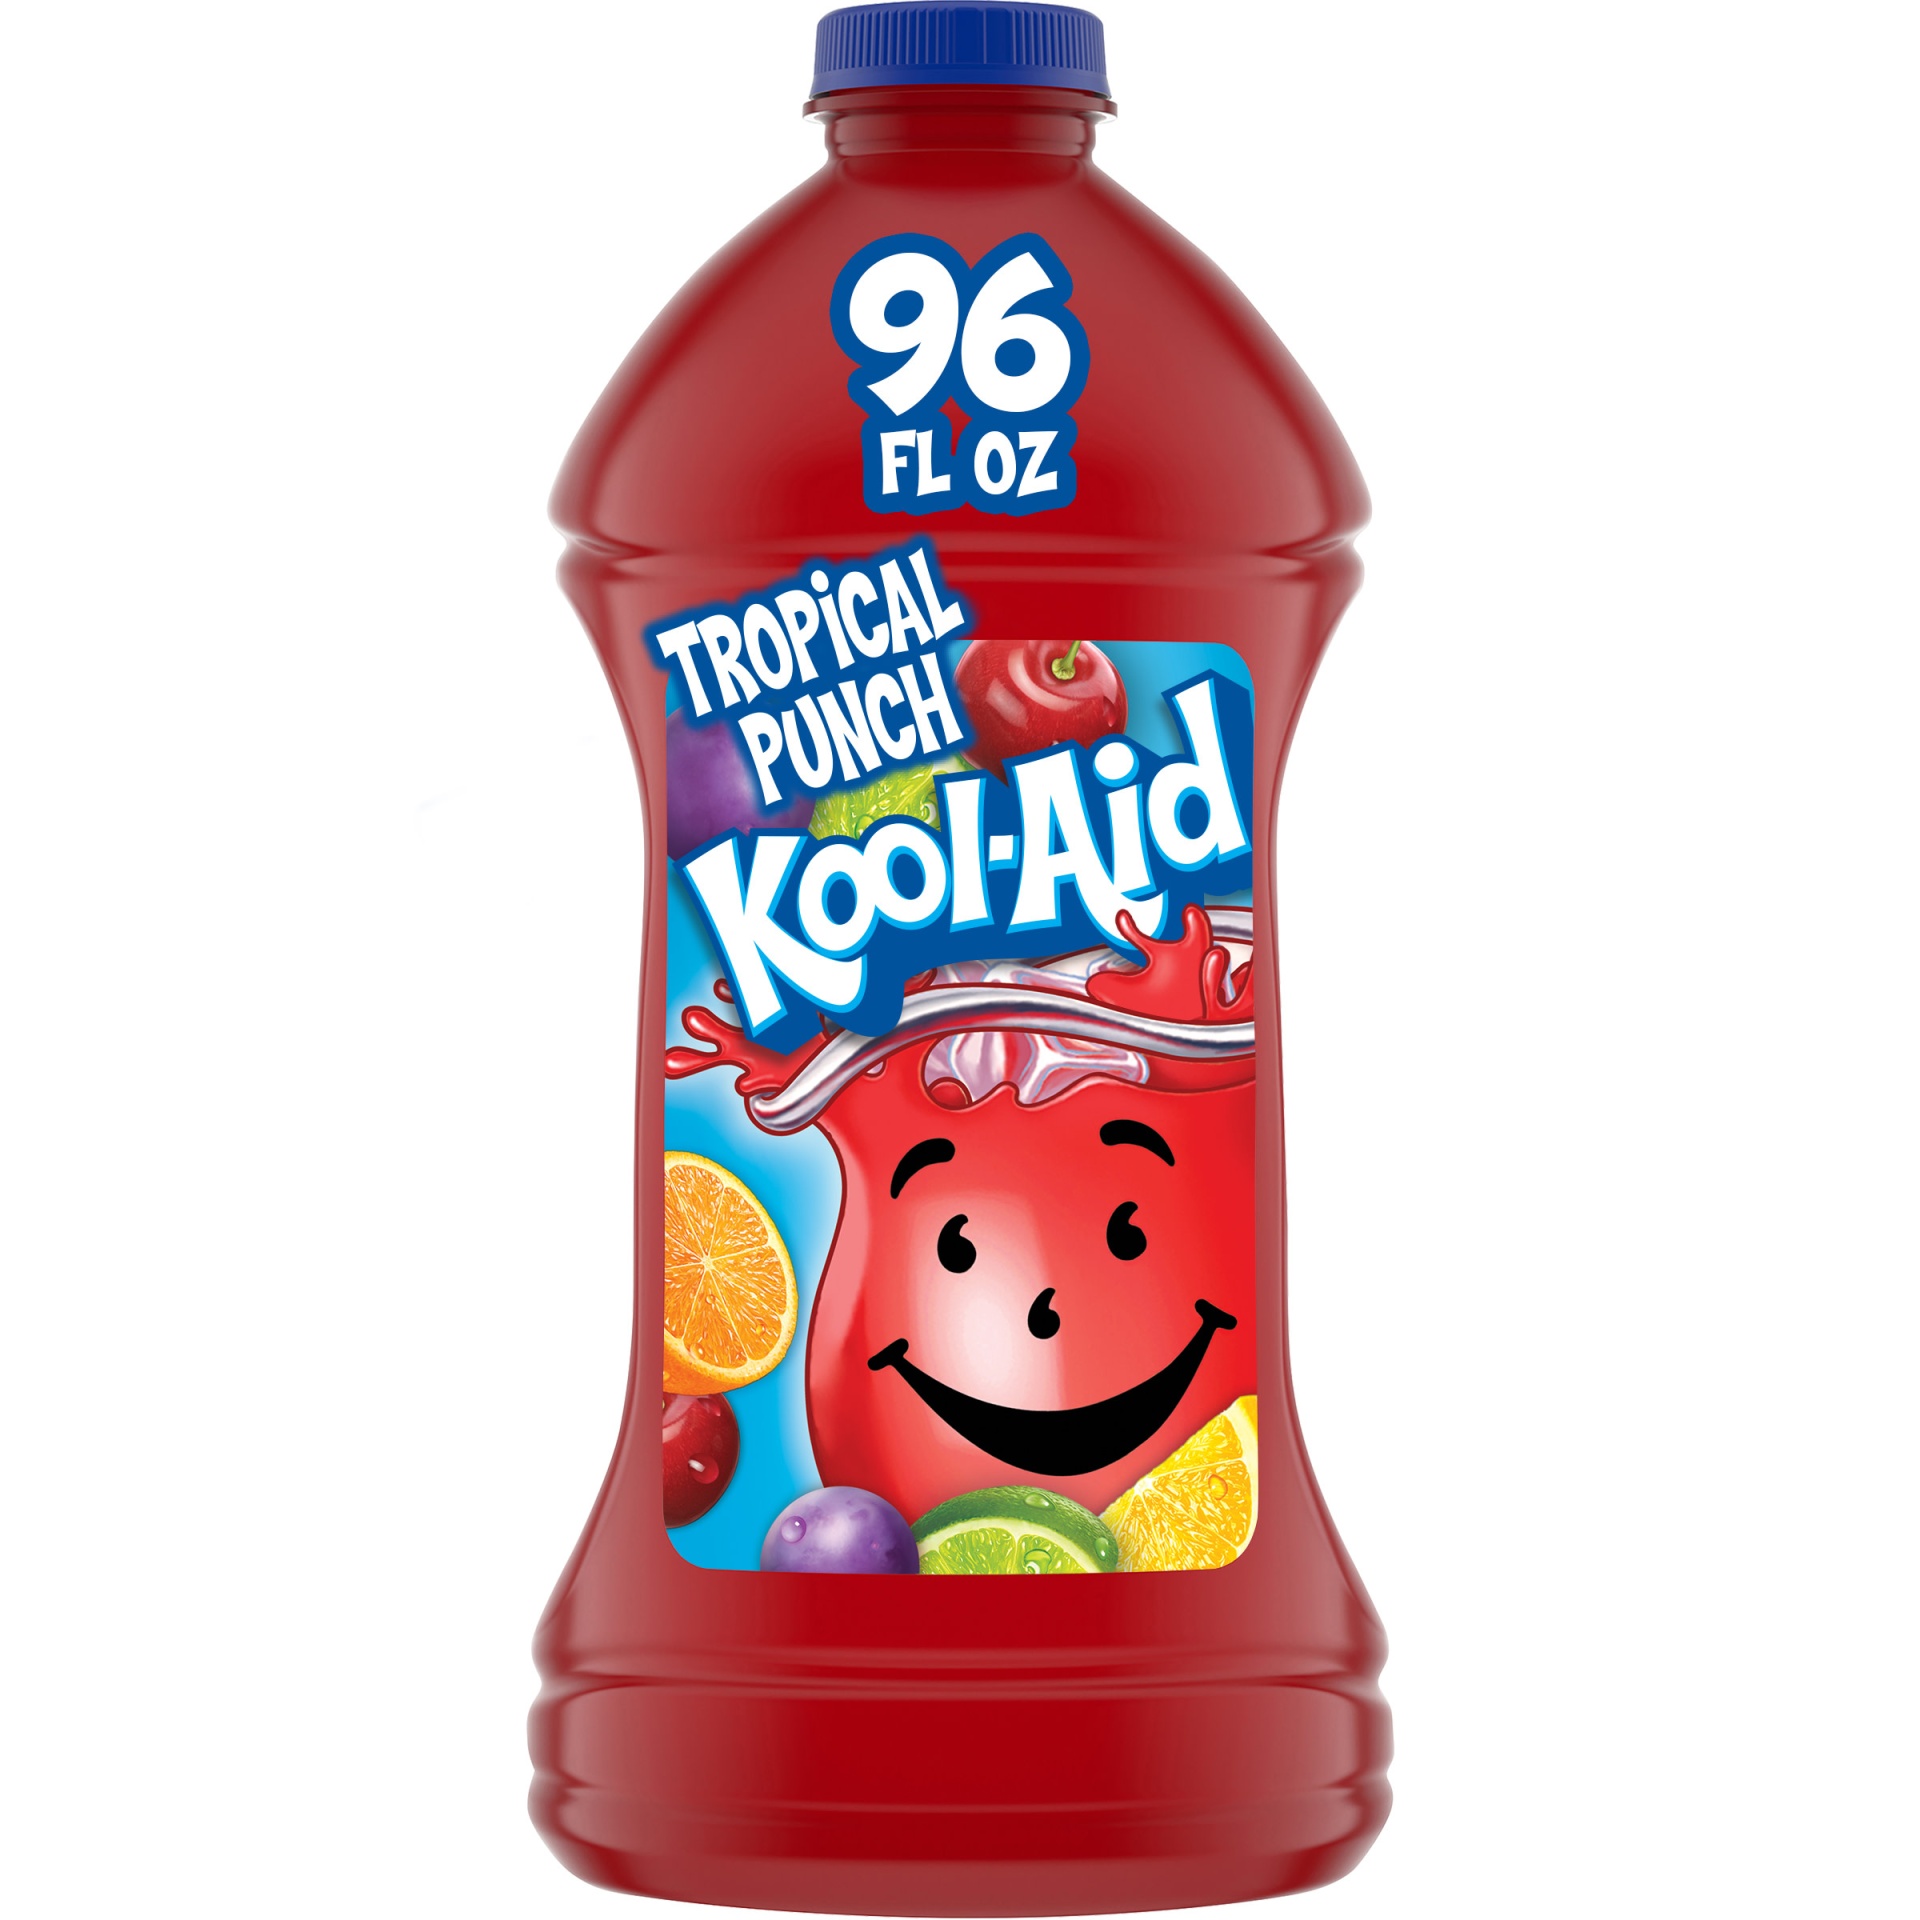 slide 1 of 1, Kool-Aid Tropical Punch Artificially Flavored Drink Bottle, 96 oz